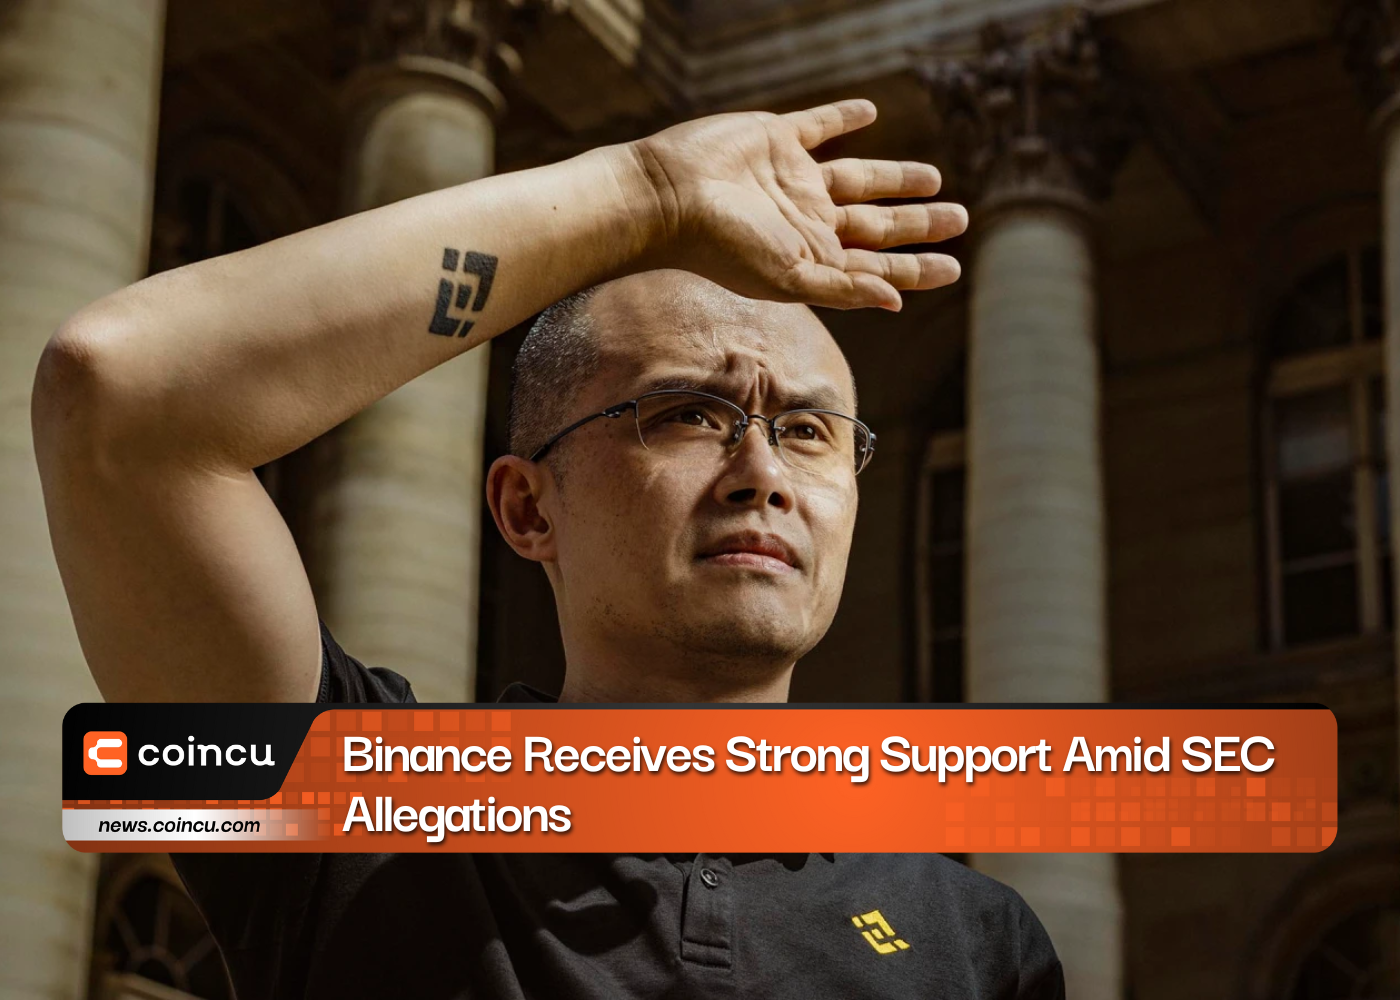 Binance Receives Strong Support Amid SEC Allegations